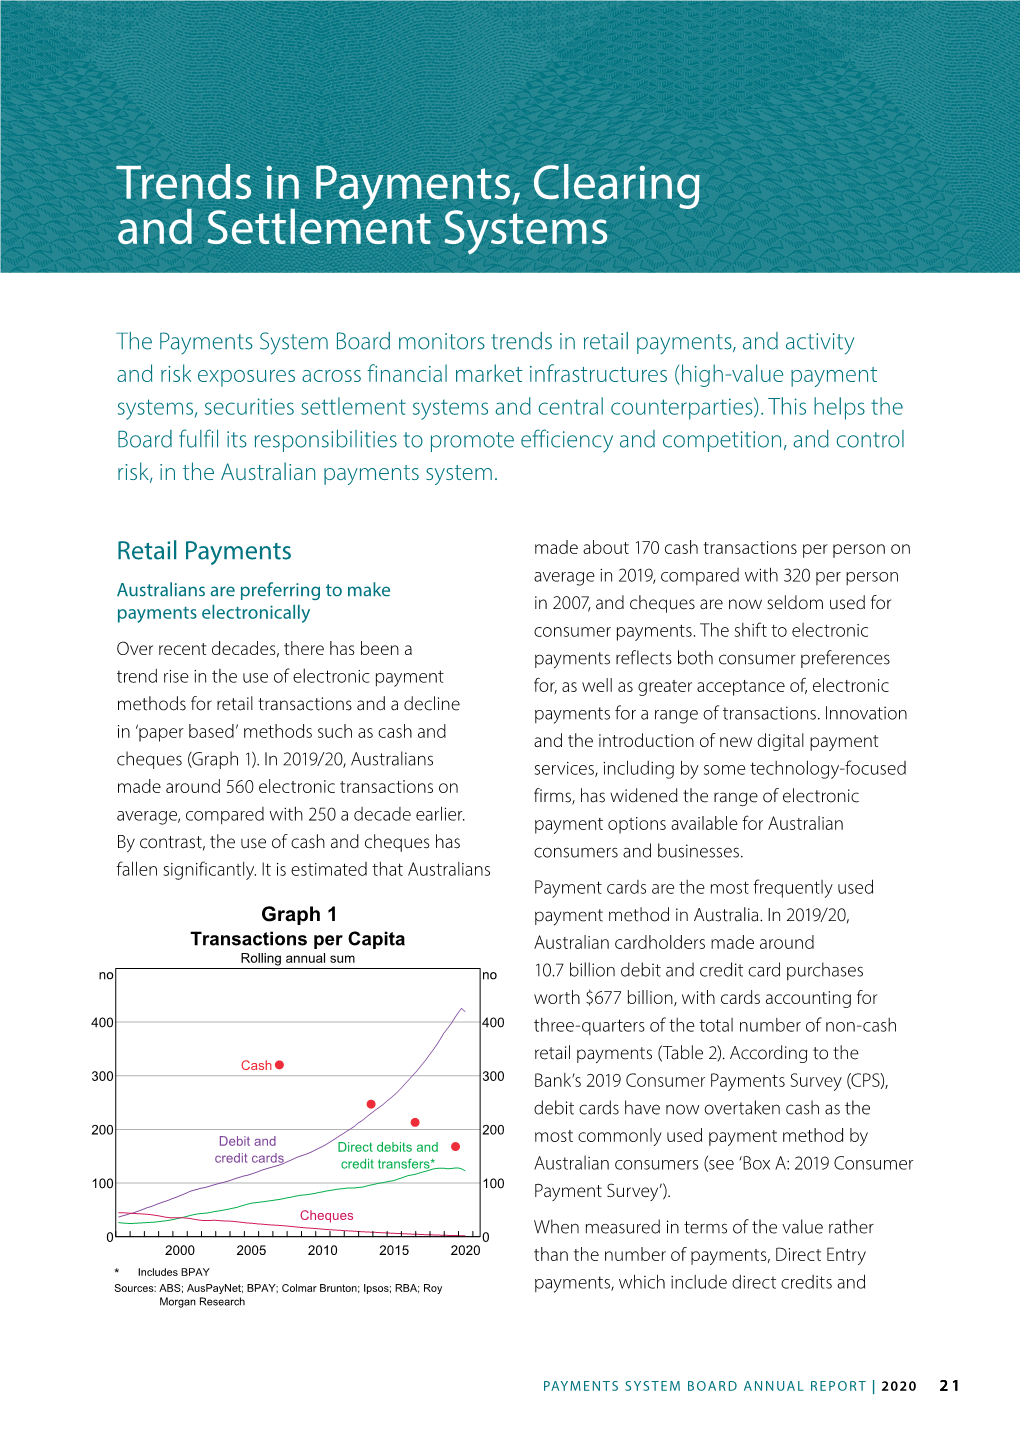 Trends in Payments, Clearing and Settlement Systems